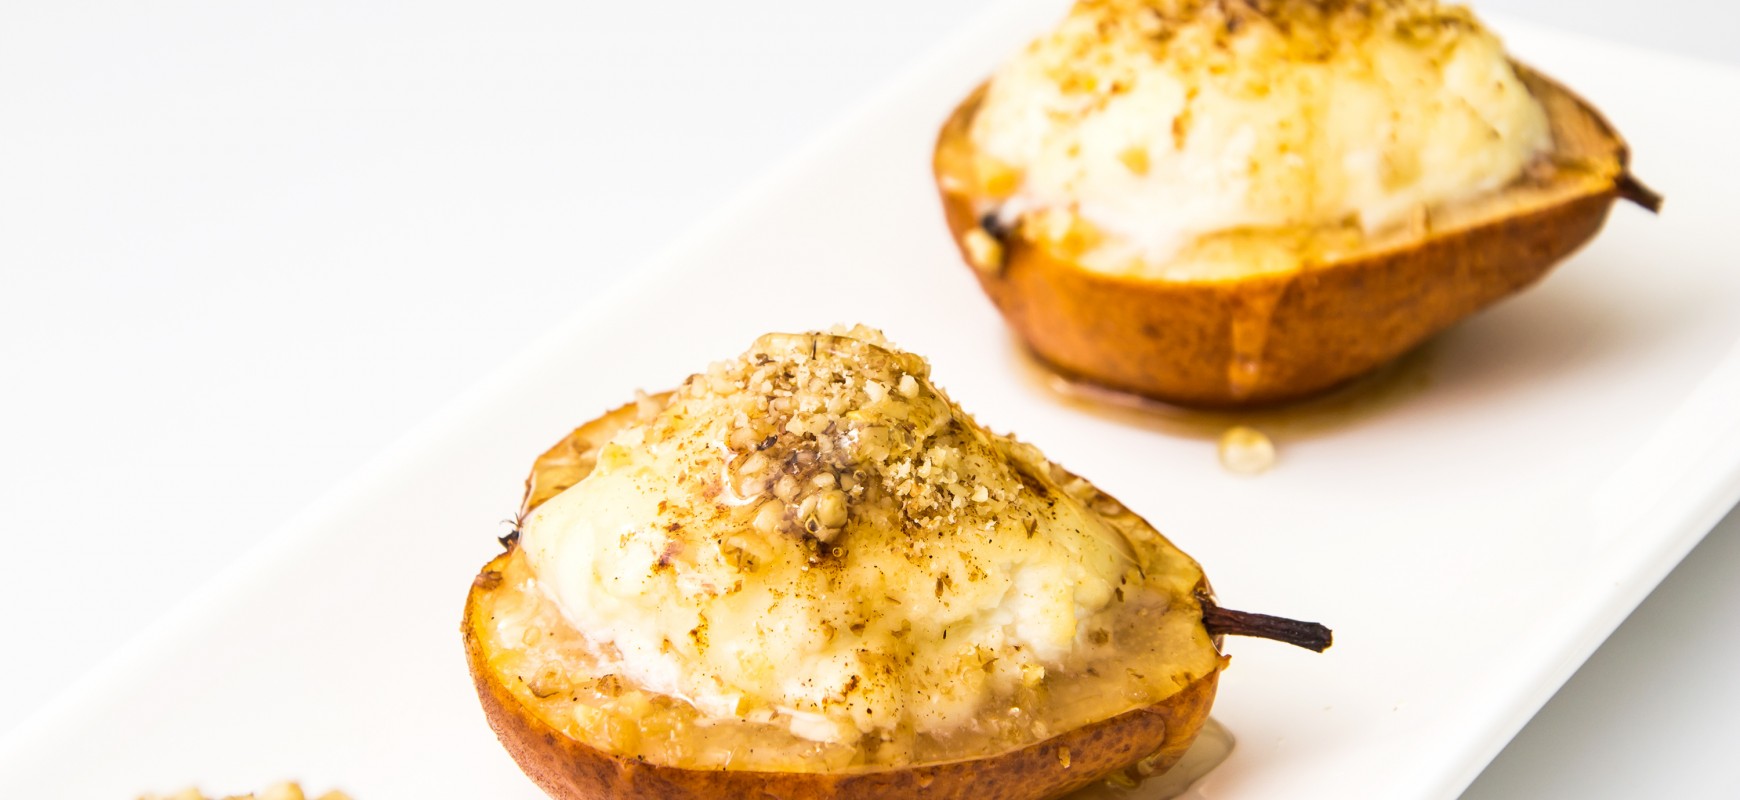 Sliced Pears with Ricotta Cheese